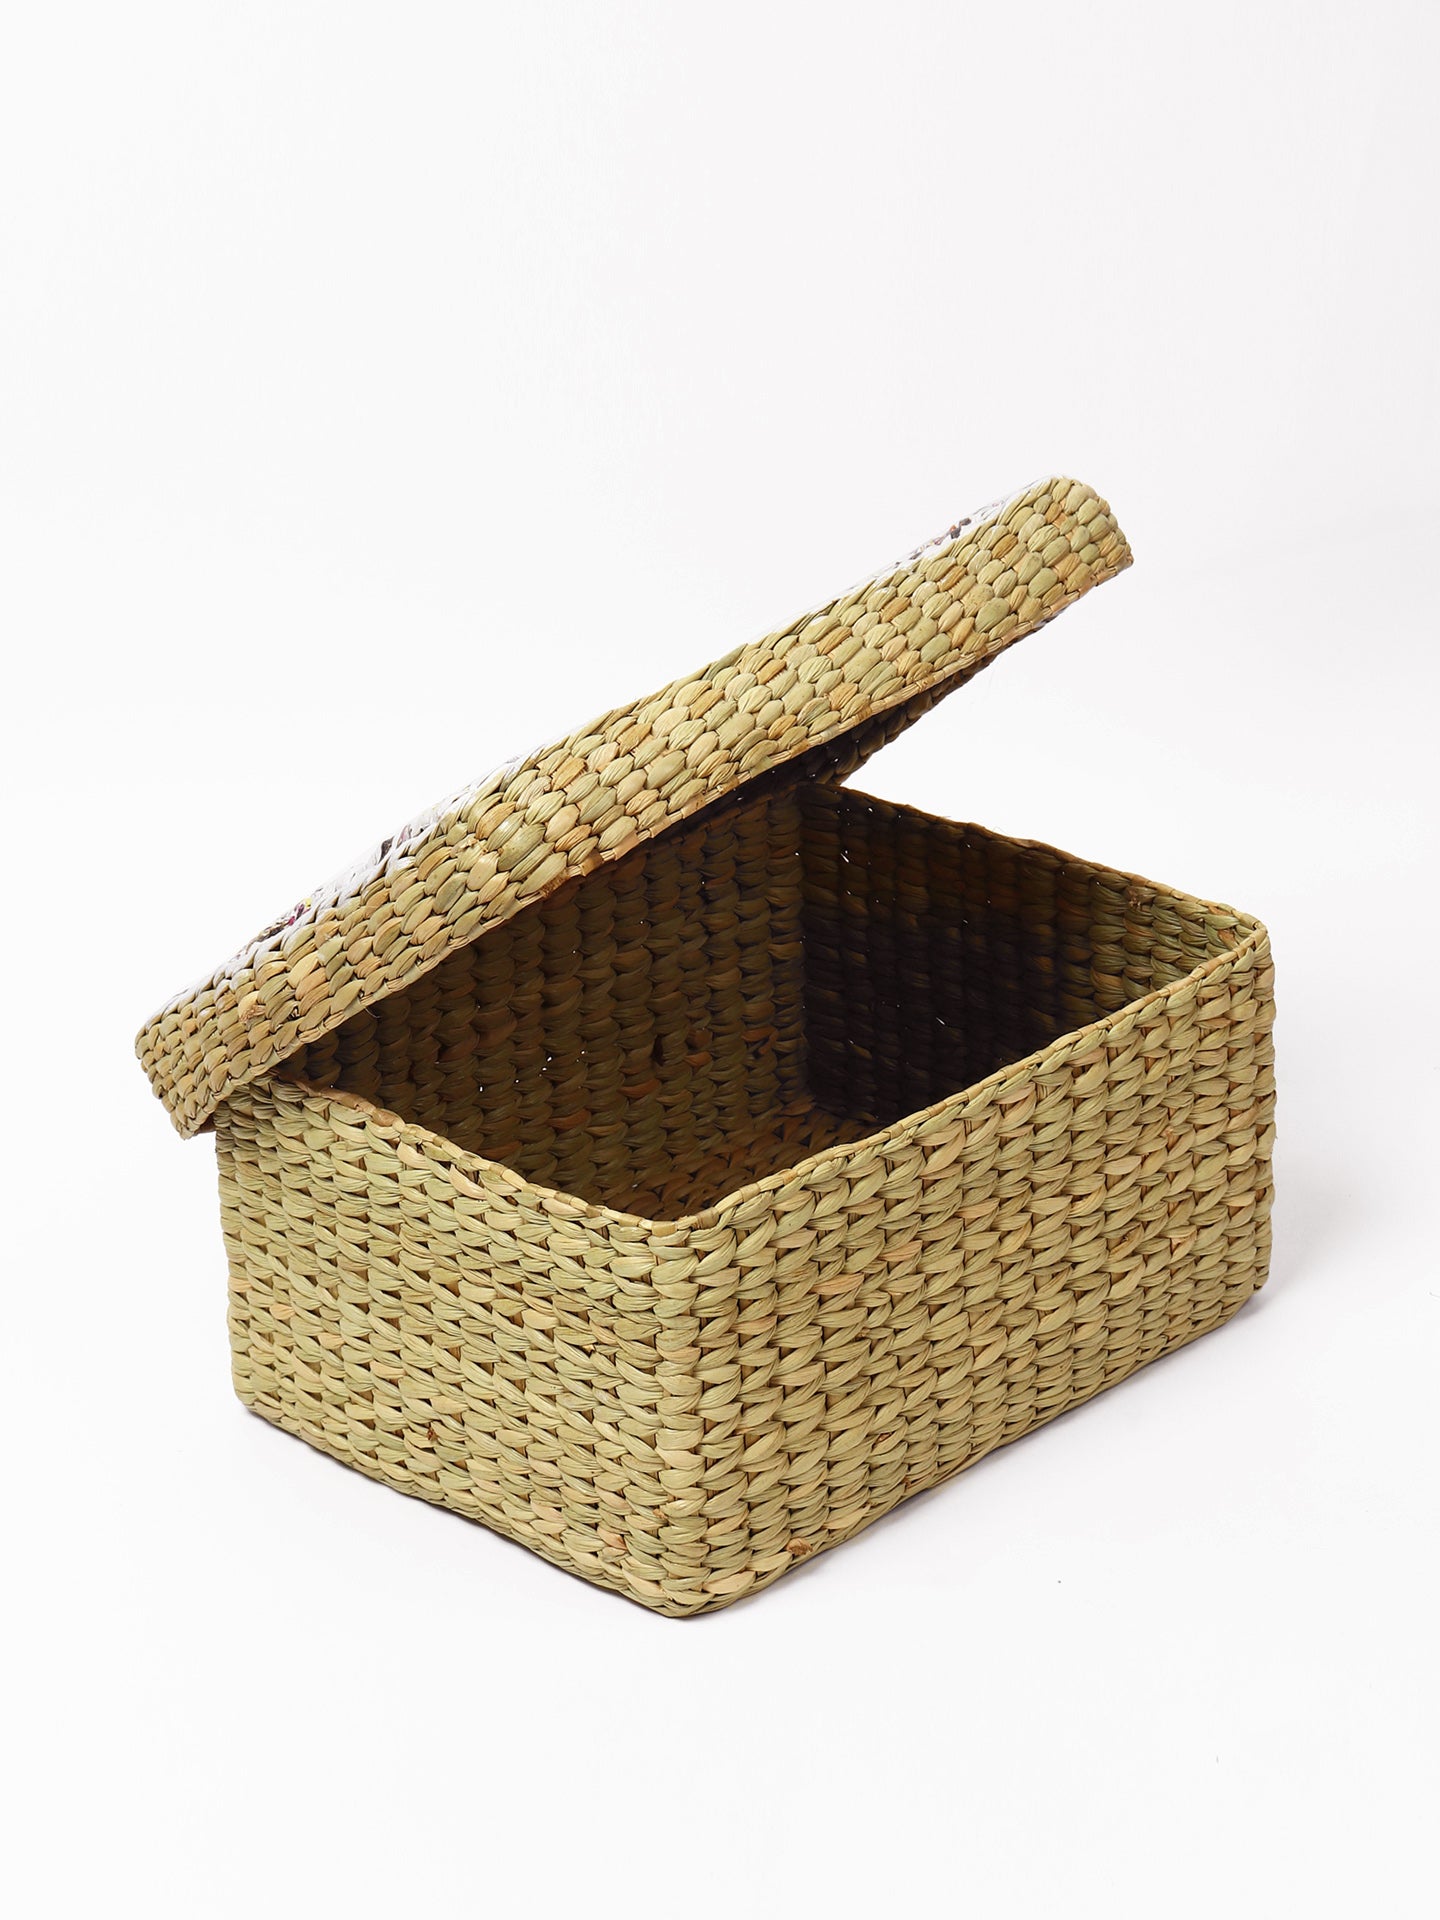 Large Size Seagrass Lid Boxes